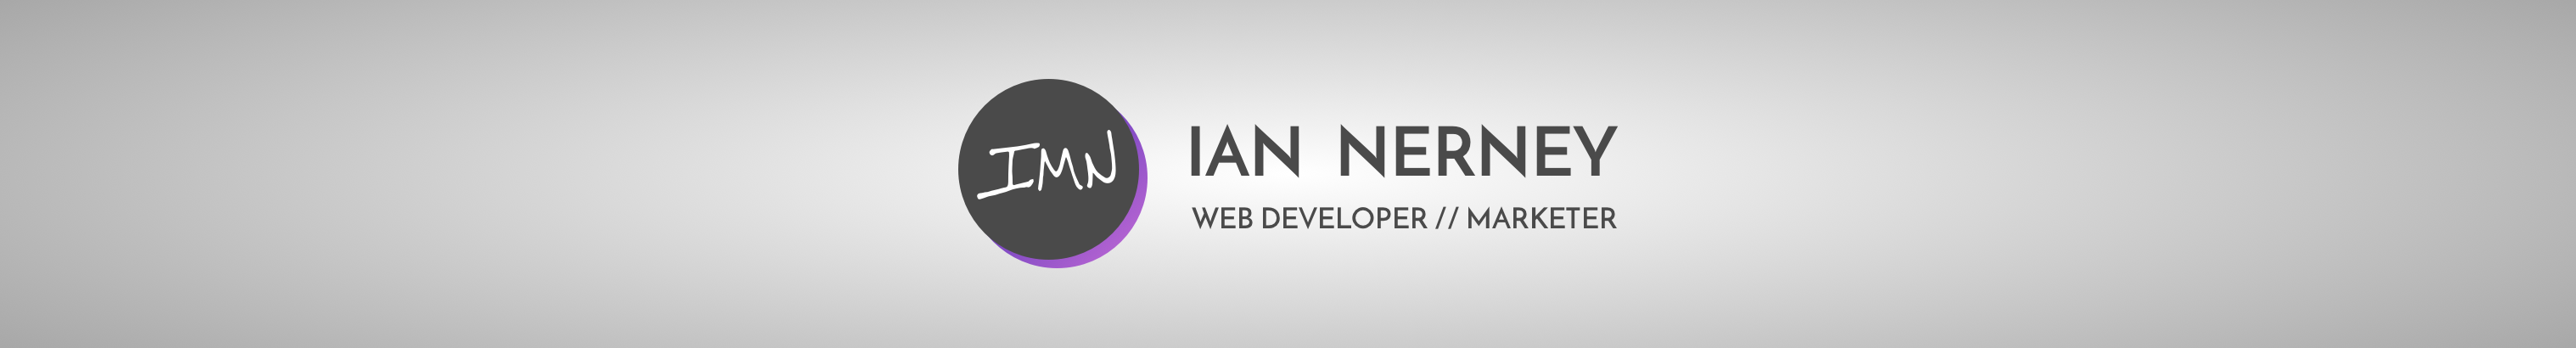 Ian Nerney's profile banner